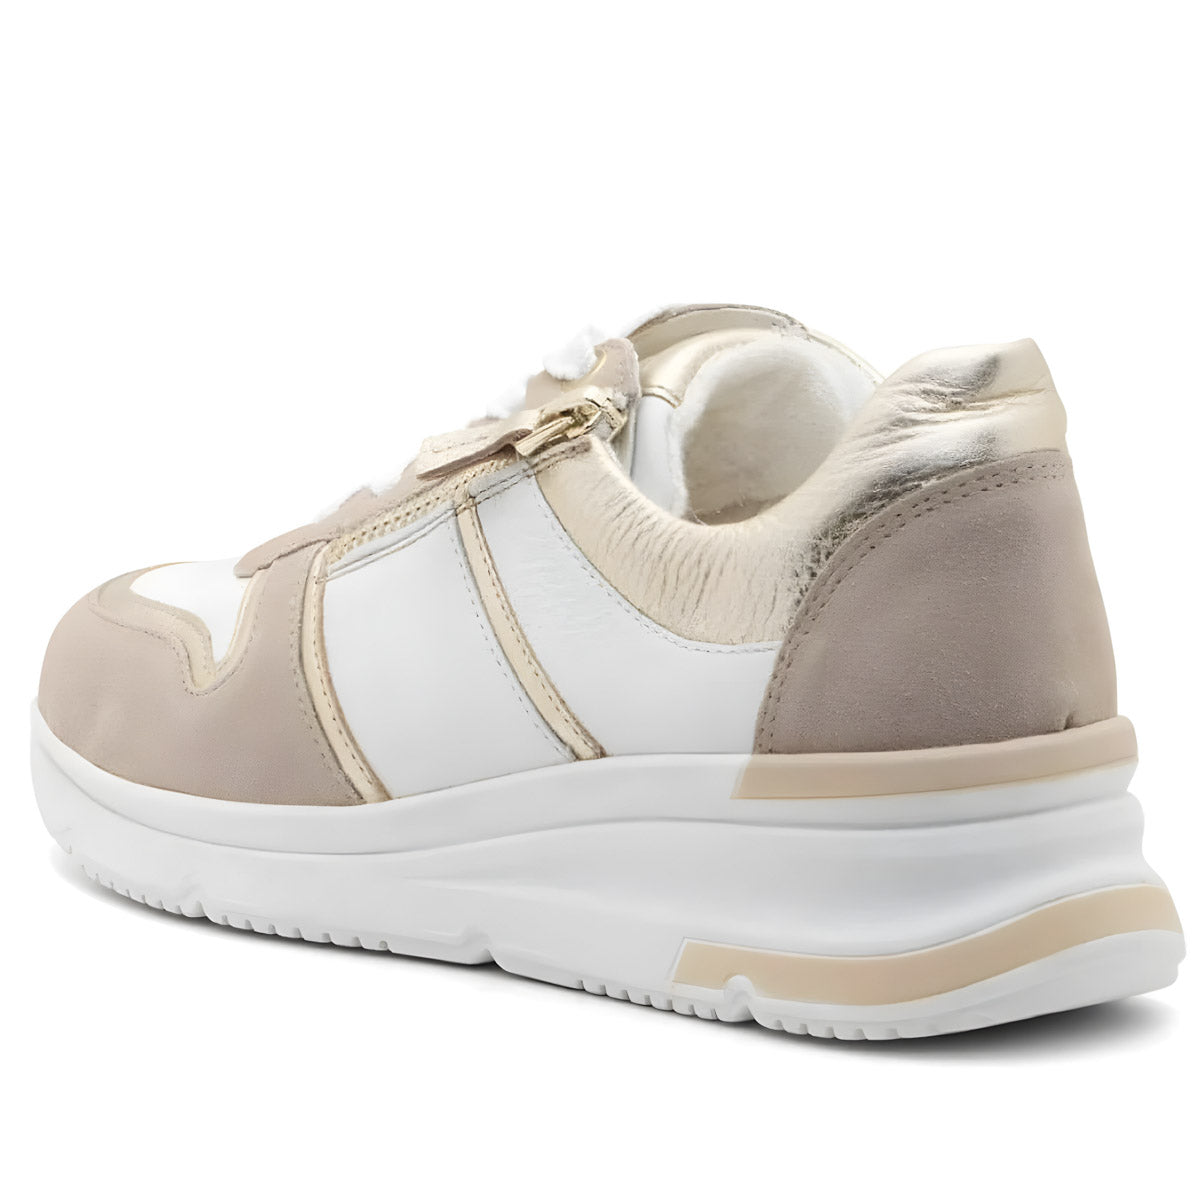 Ara Neapel Tron White Leather Wedge Trainers with Gold Accents